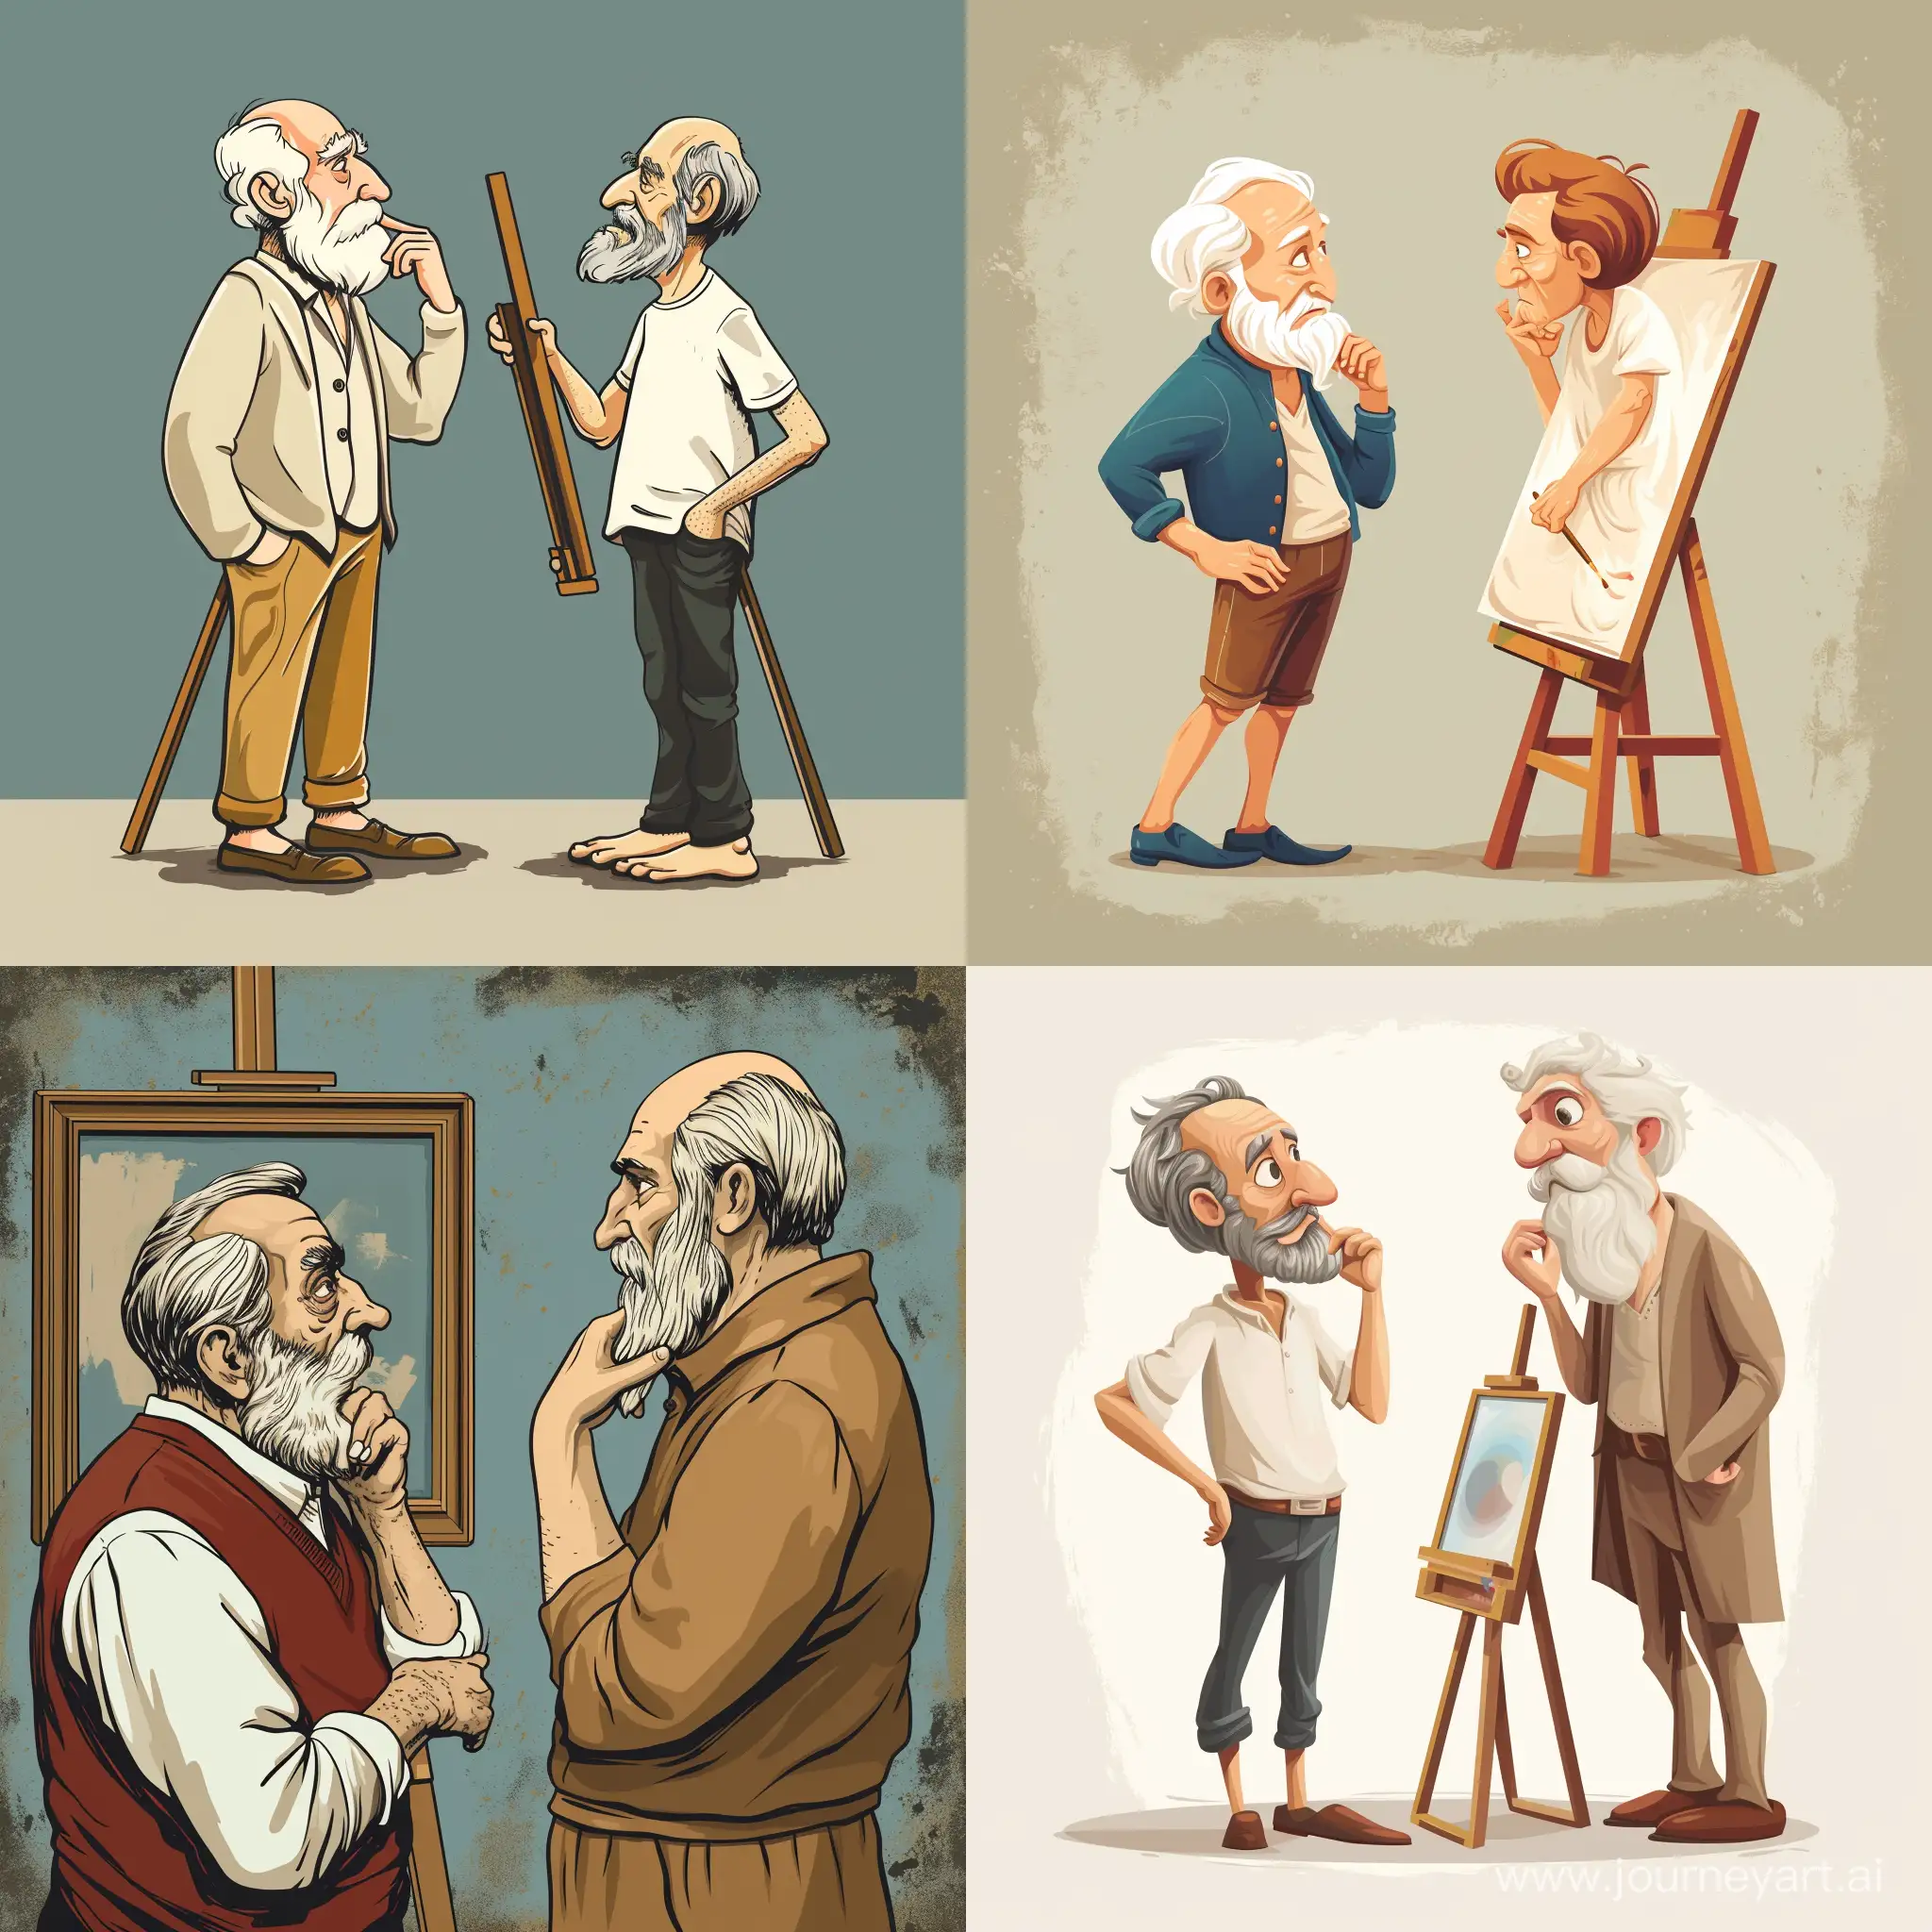 Contemplative-Collaboration-Vector-Man-Philosopher-and-Old-Painter-Reflecting-Together